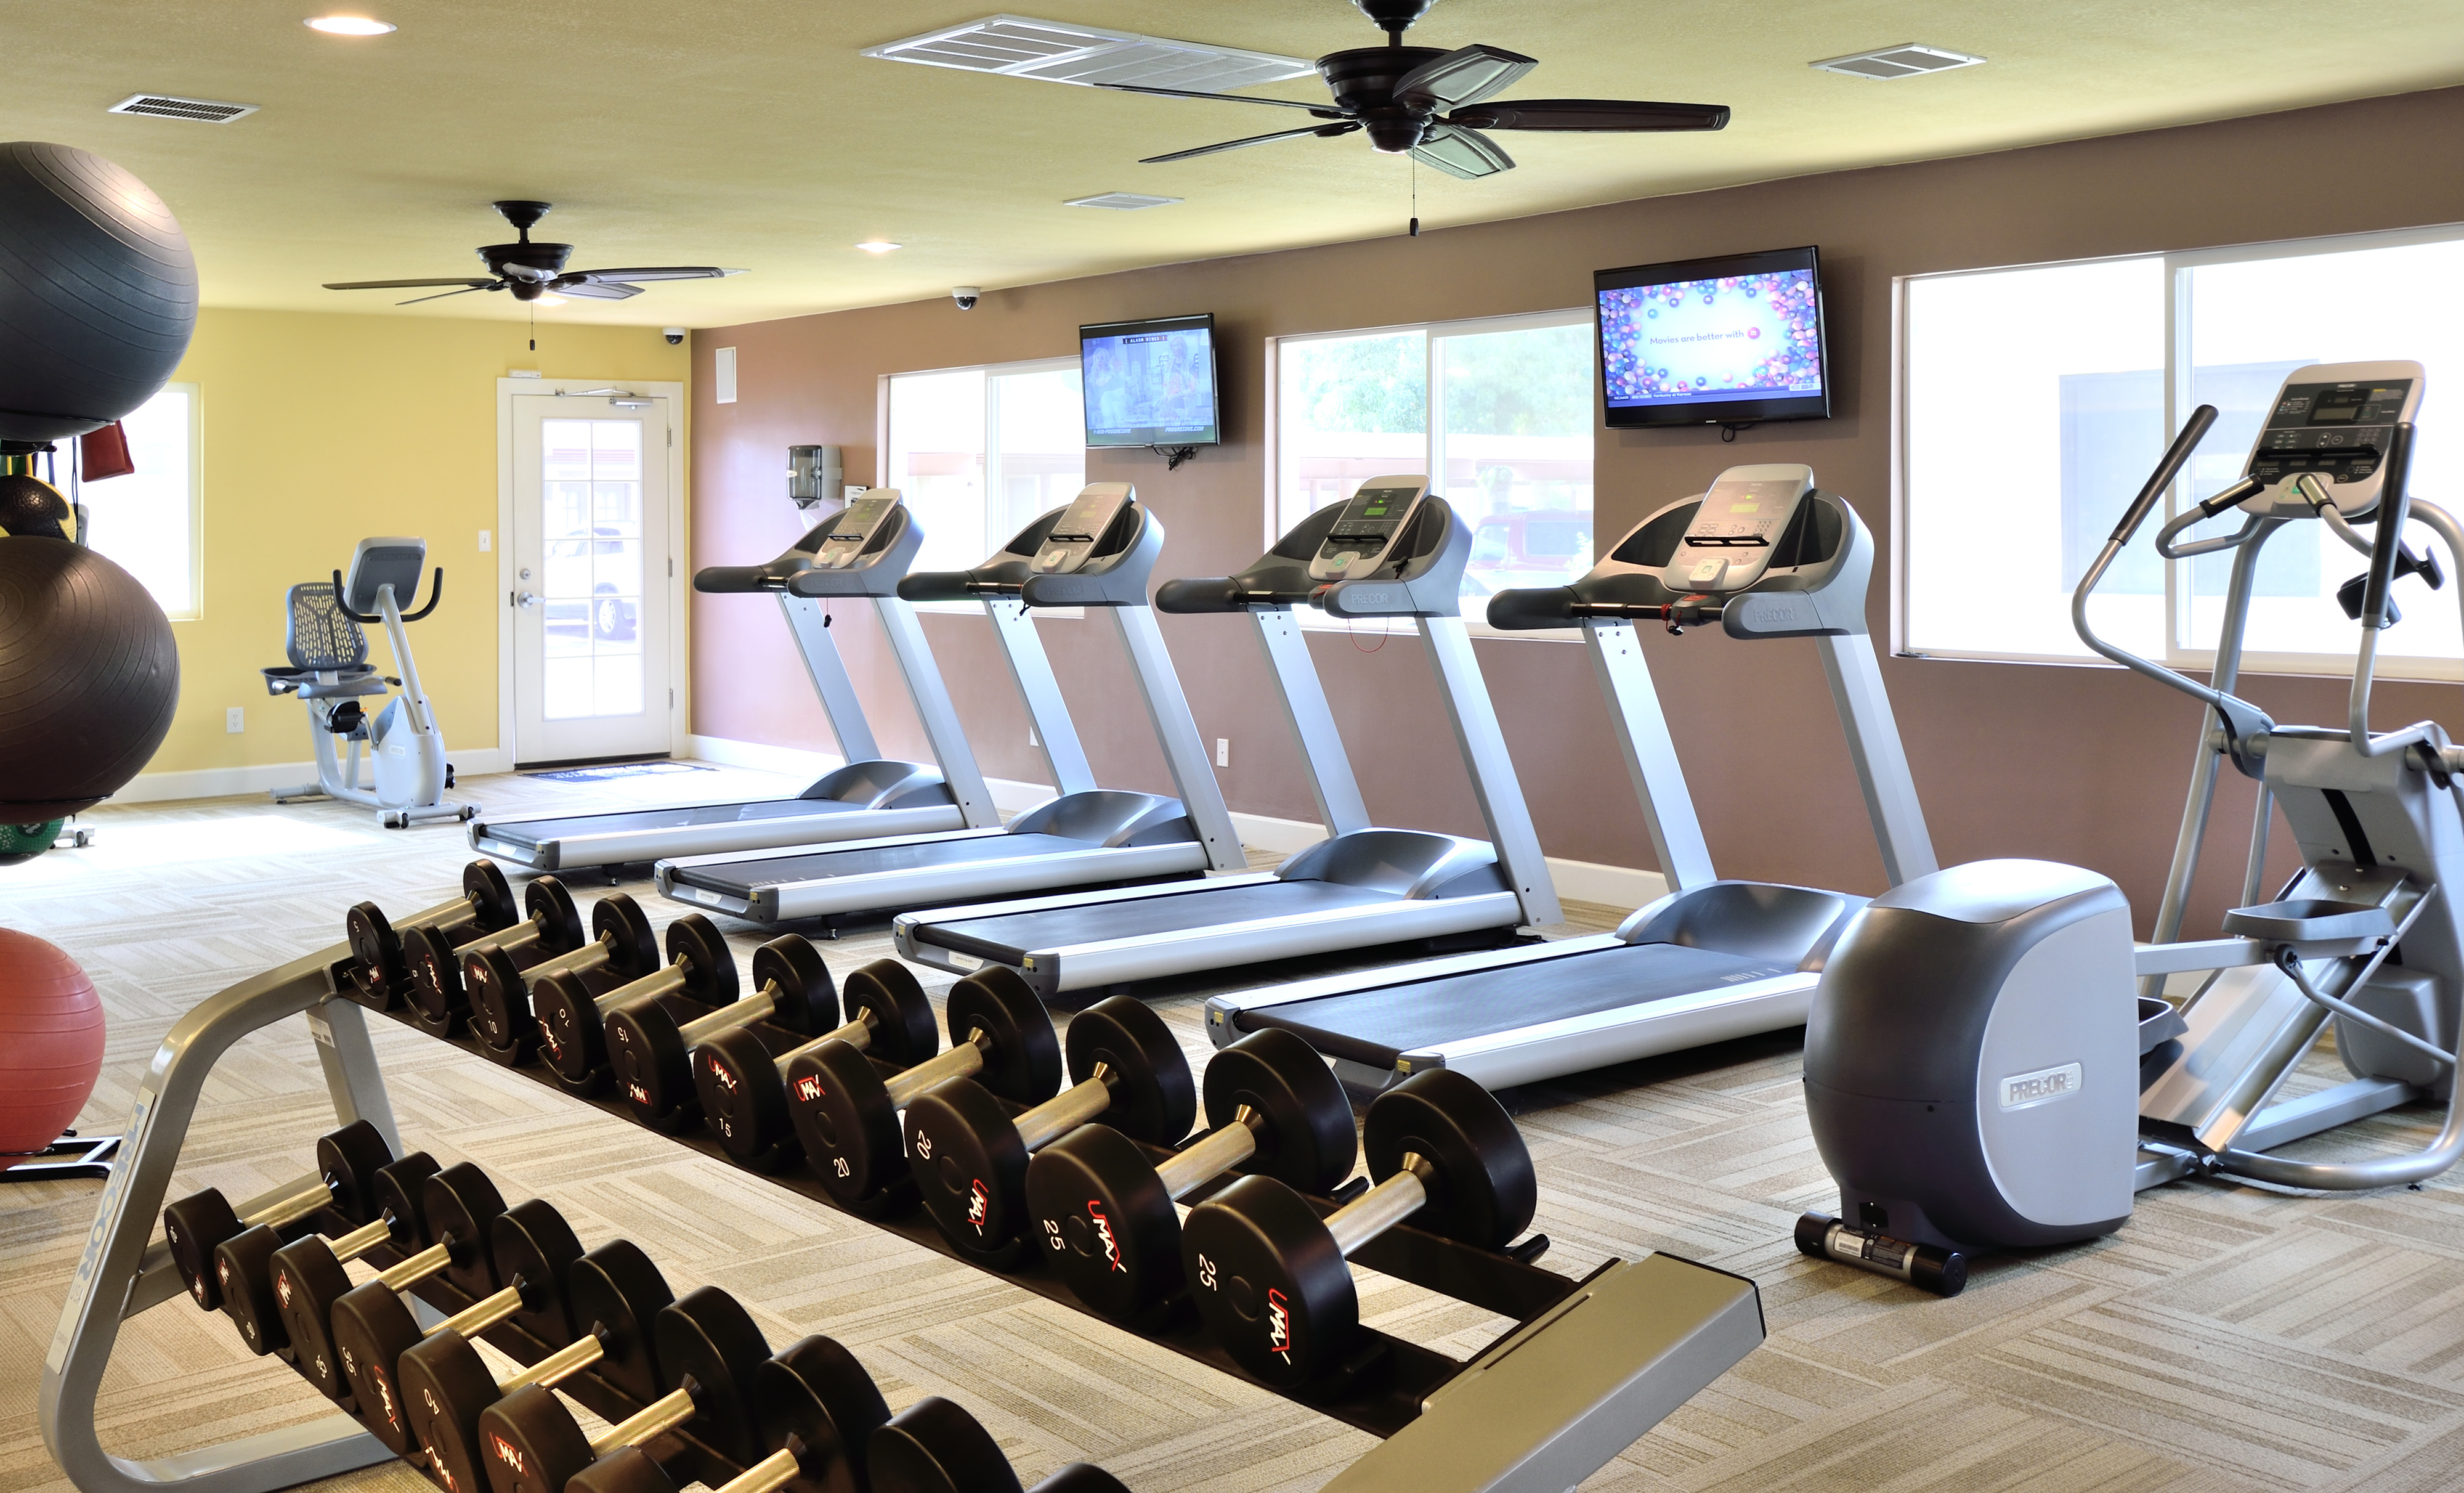 View of Fitness Center, Showing Cardio Equipment, Ceiling Fans, Flat Screen TV\'s and Weight Bench at Camelot Apartments